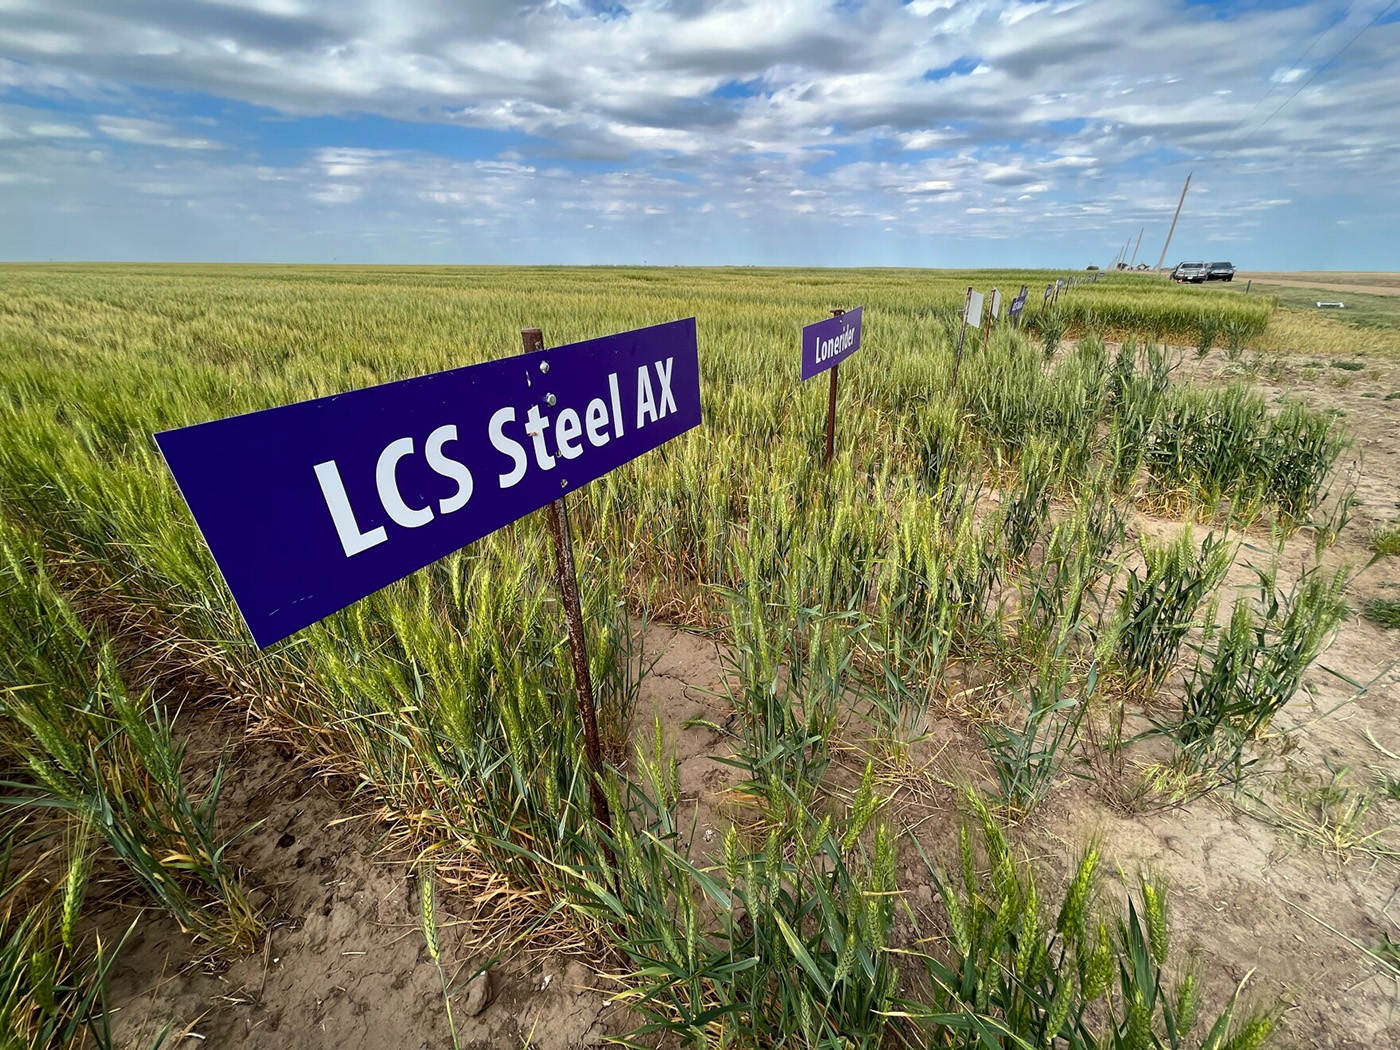 Green wheat fields with several signs planted in the ground, not far apart. The readable one says: "LCS Steel AX"